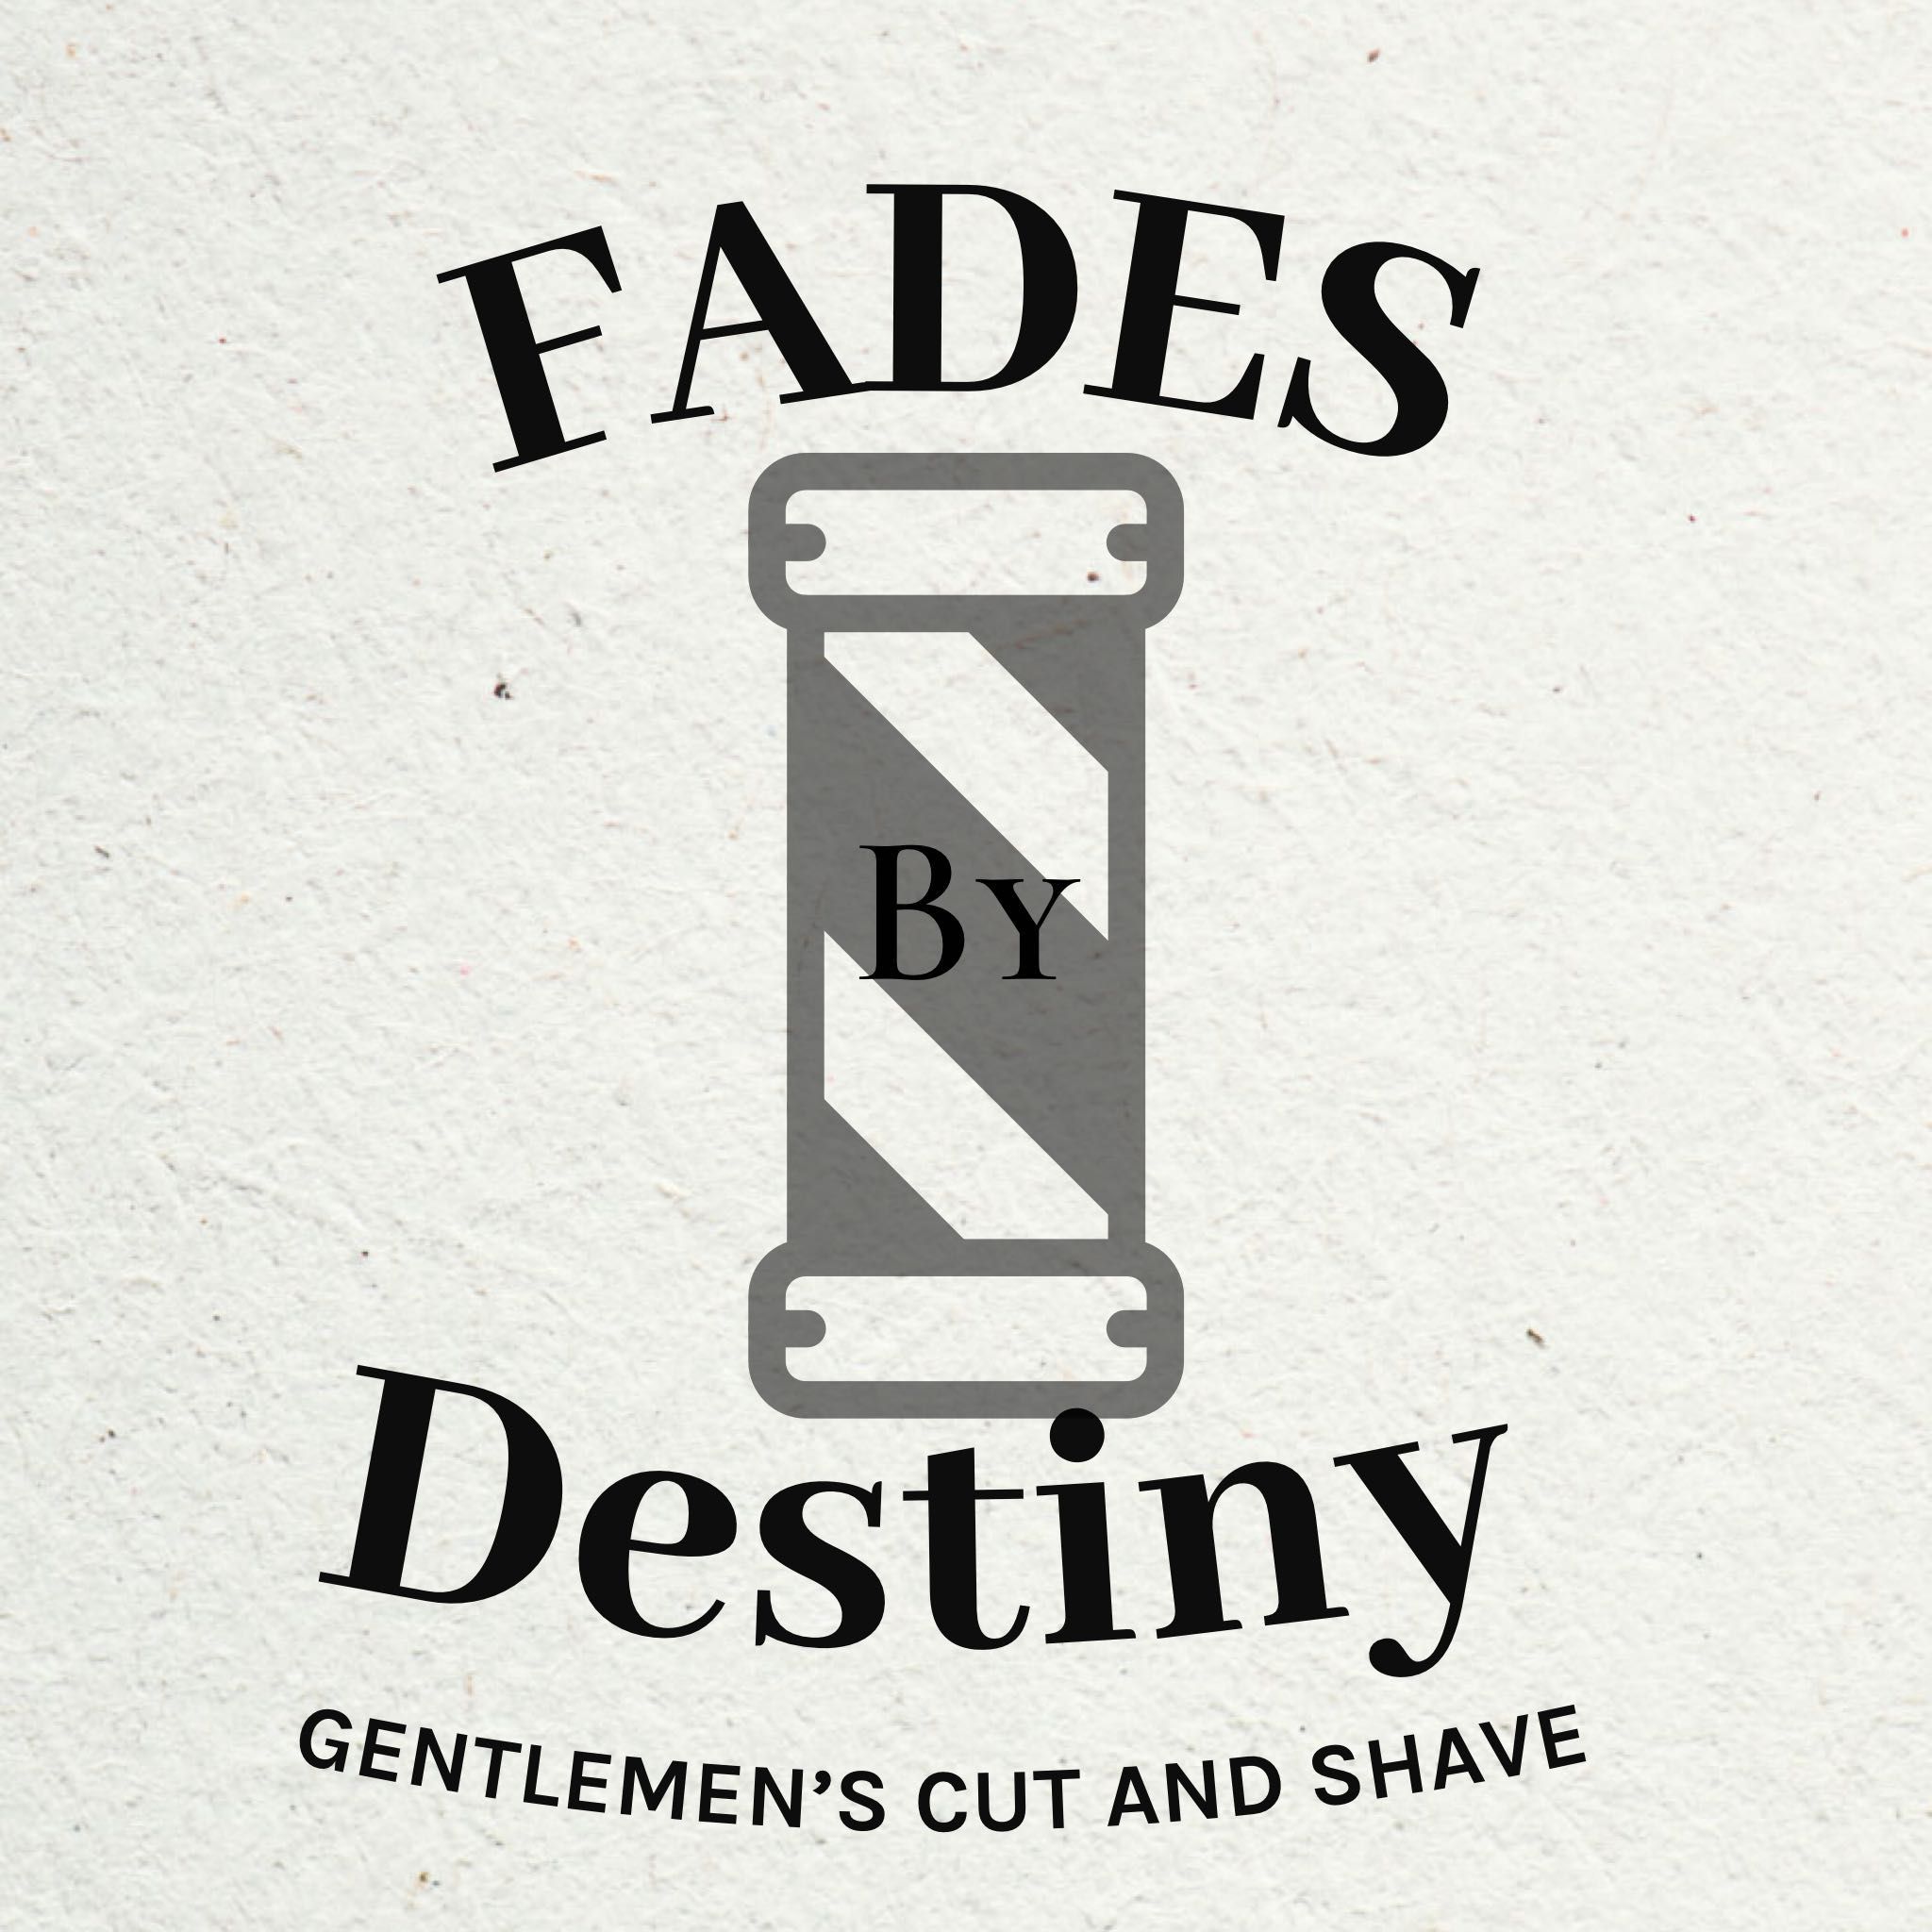 Fades byDee, 416 W Foothill Blvd, 416 A, Monrovia, 91016